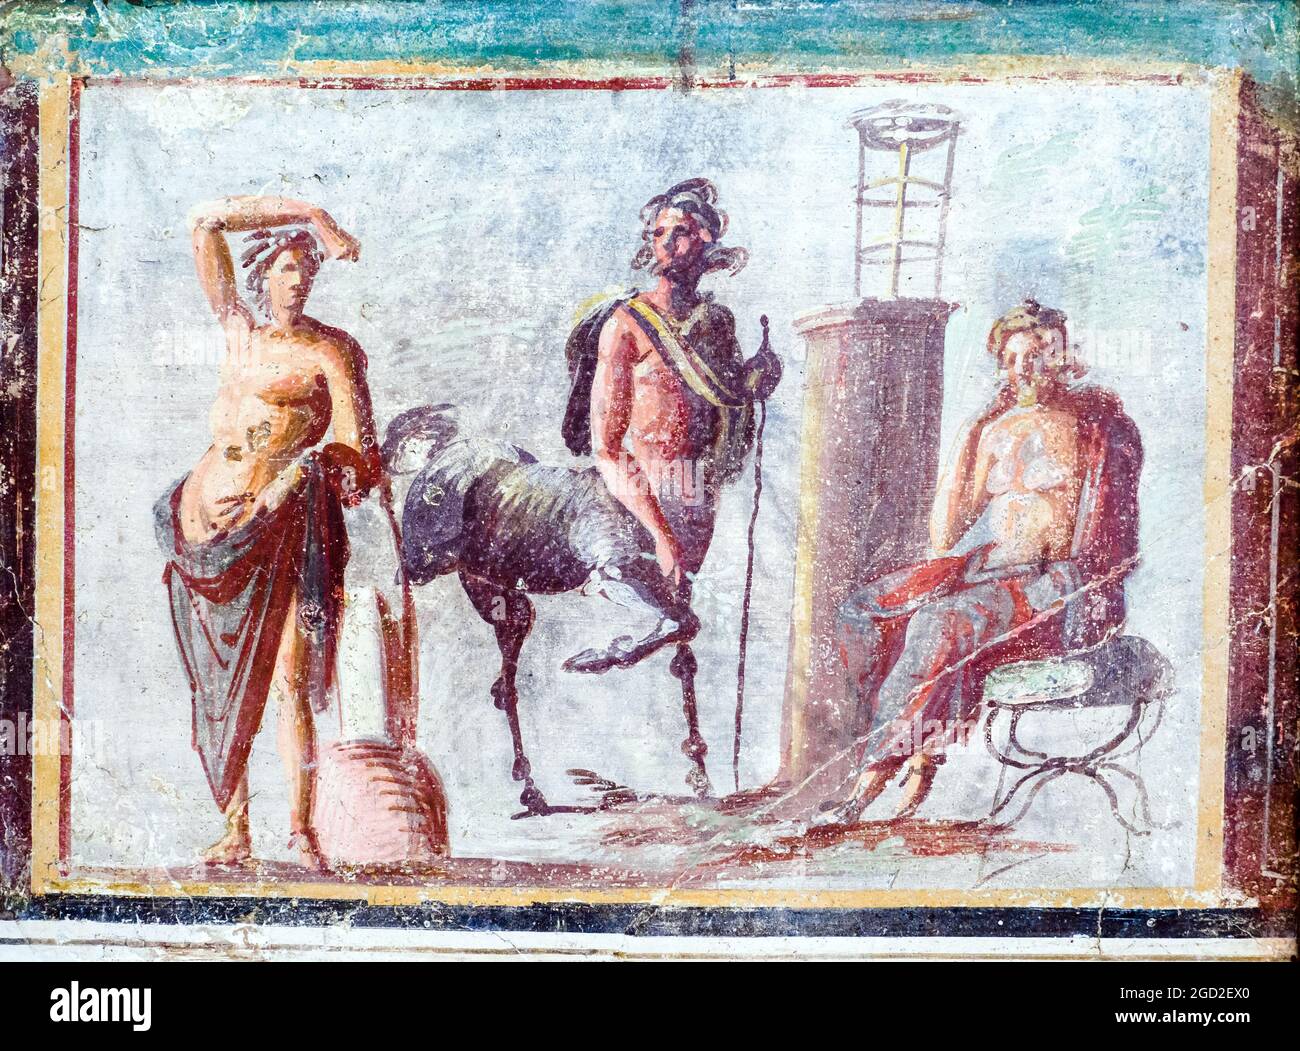 Apolo, Chiron and Asclepius The Centaur Chiron, inventor of medicine and surgery, stands between Apollo, on the left, and Asclepius, on the right Fresco Pompeii, Insula Occidentalis Second half of the 1st century BC Stock Photo